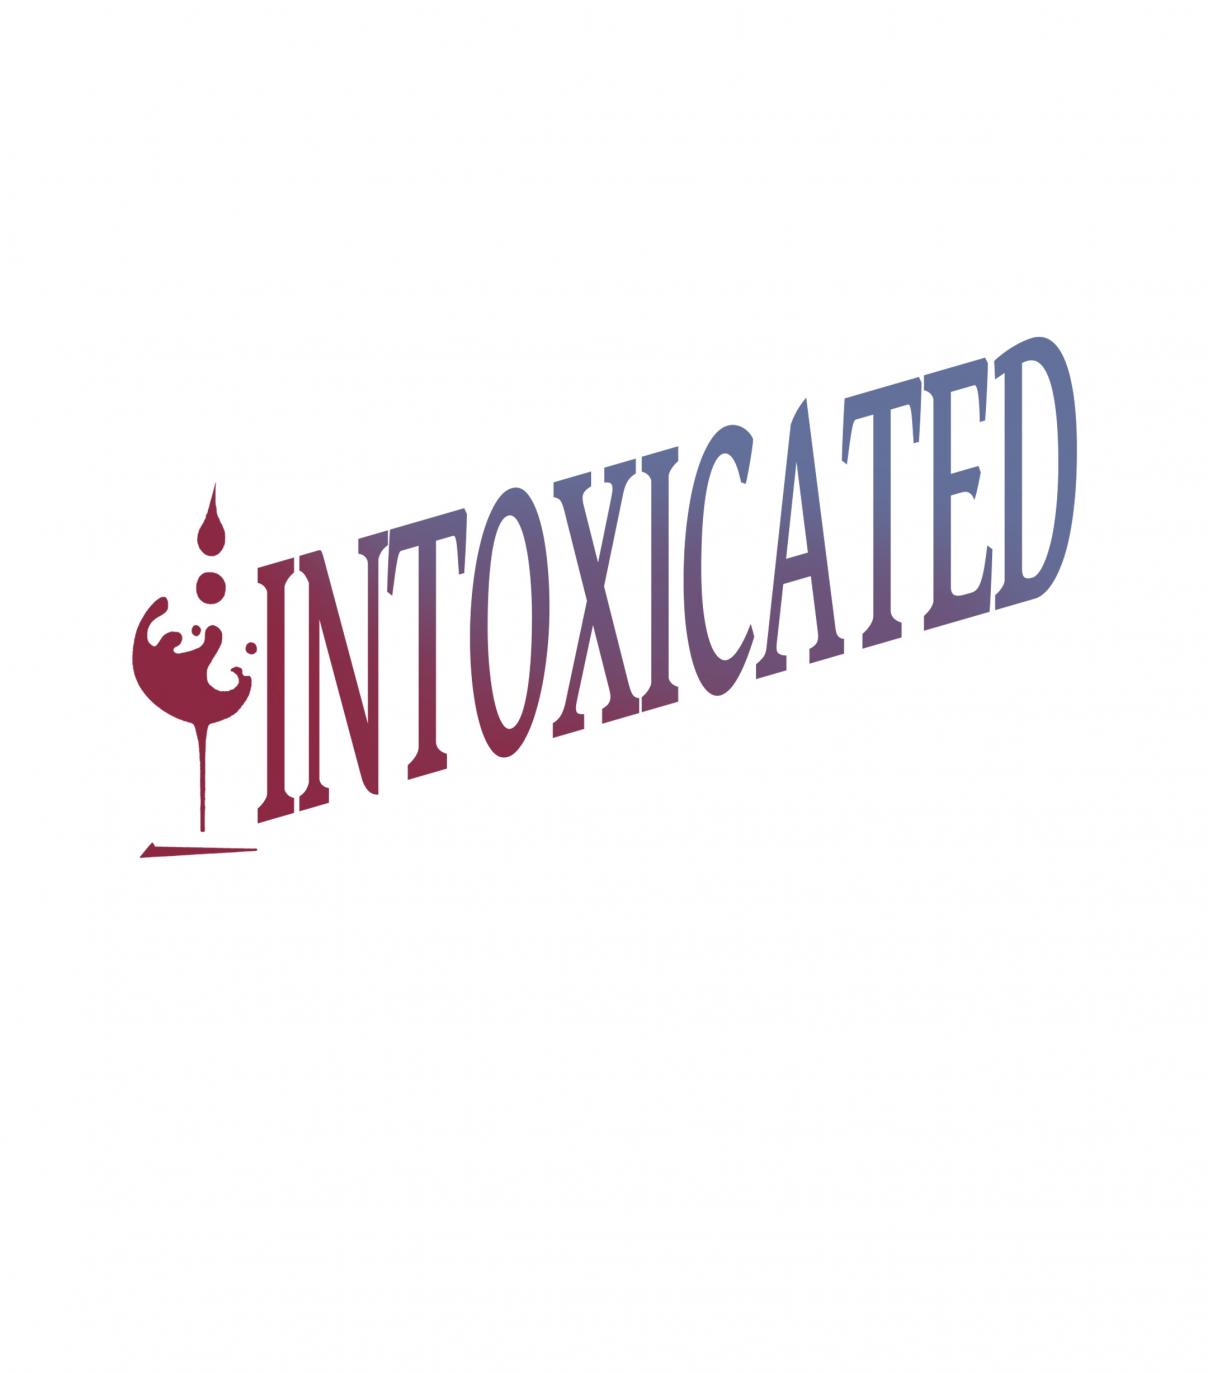 Intoxicated 34